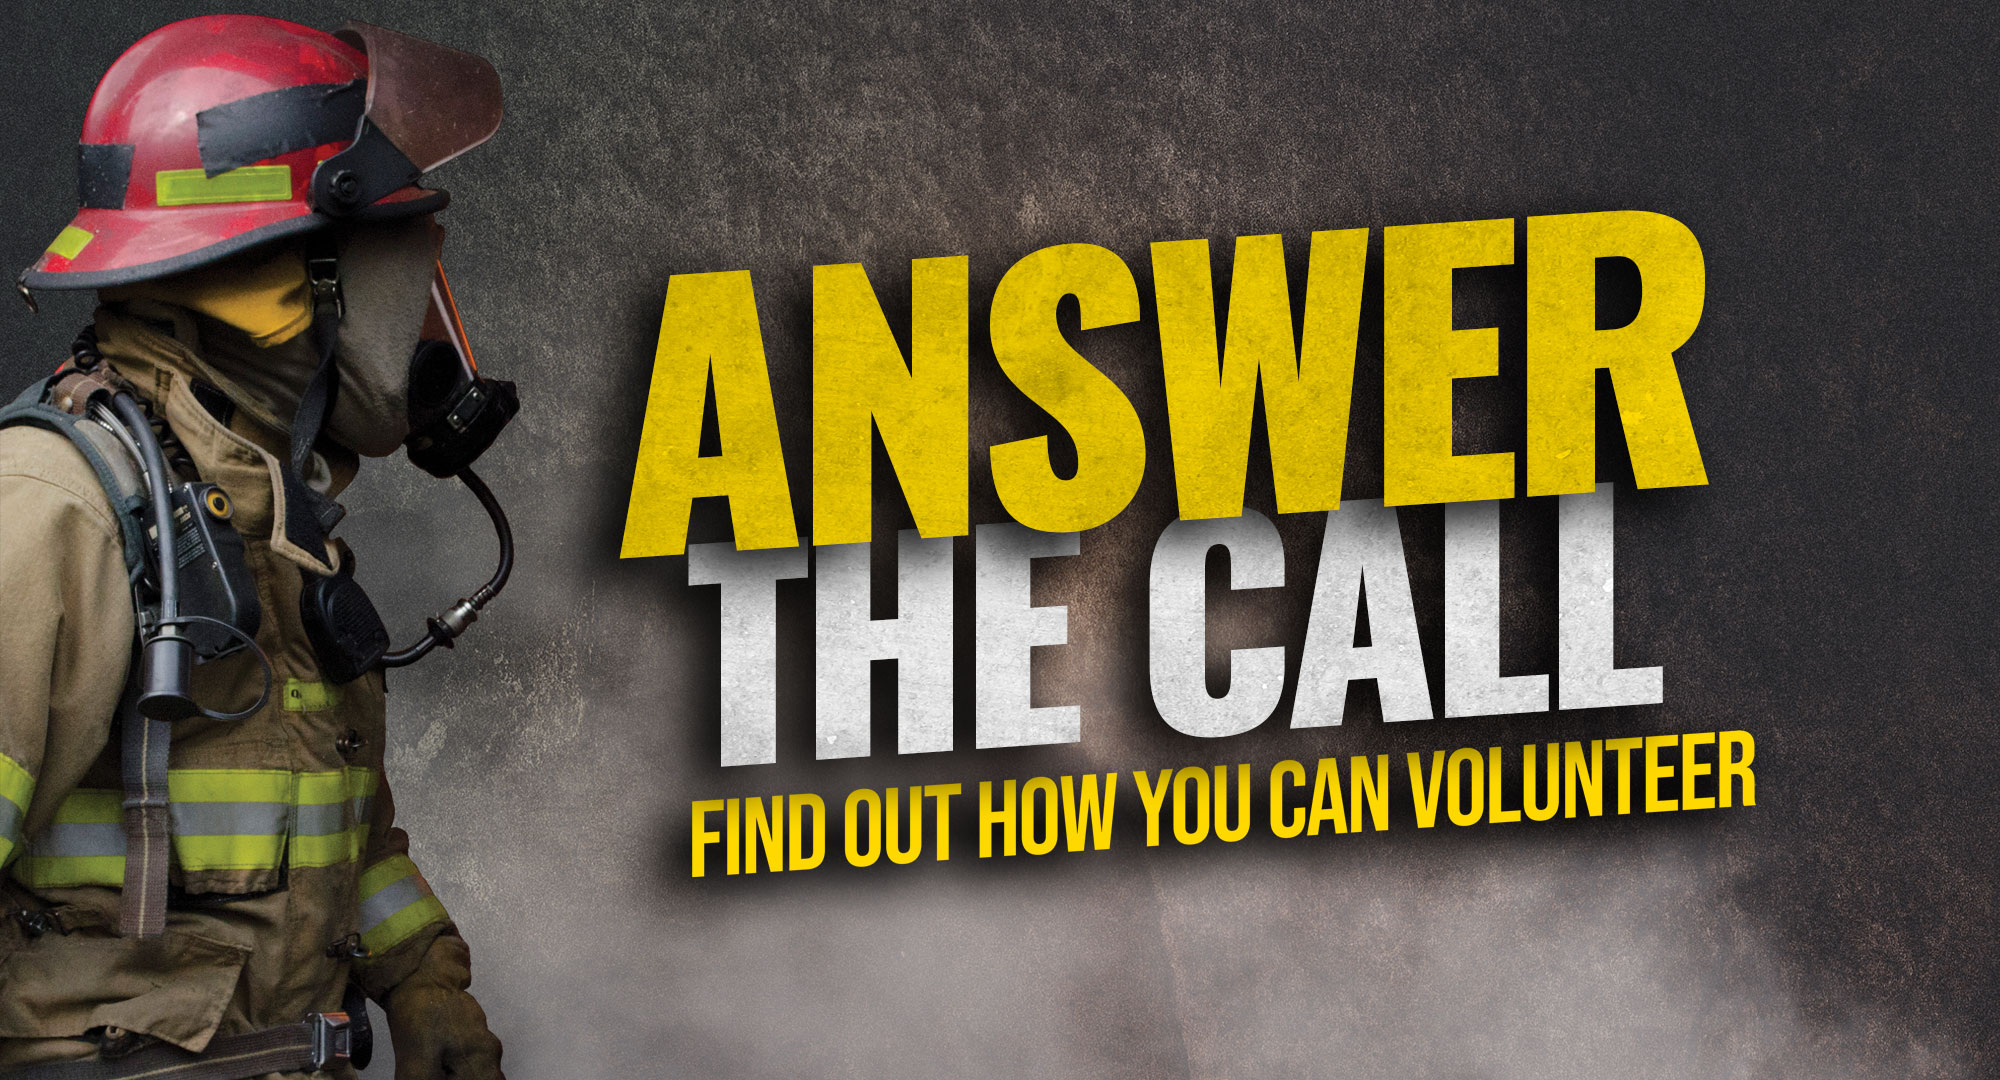 Be Part of a Tradition - Volunteer to Serve Your Community.  Do you have what it takes to be a volunteer firefighter?